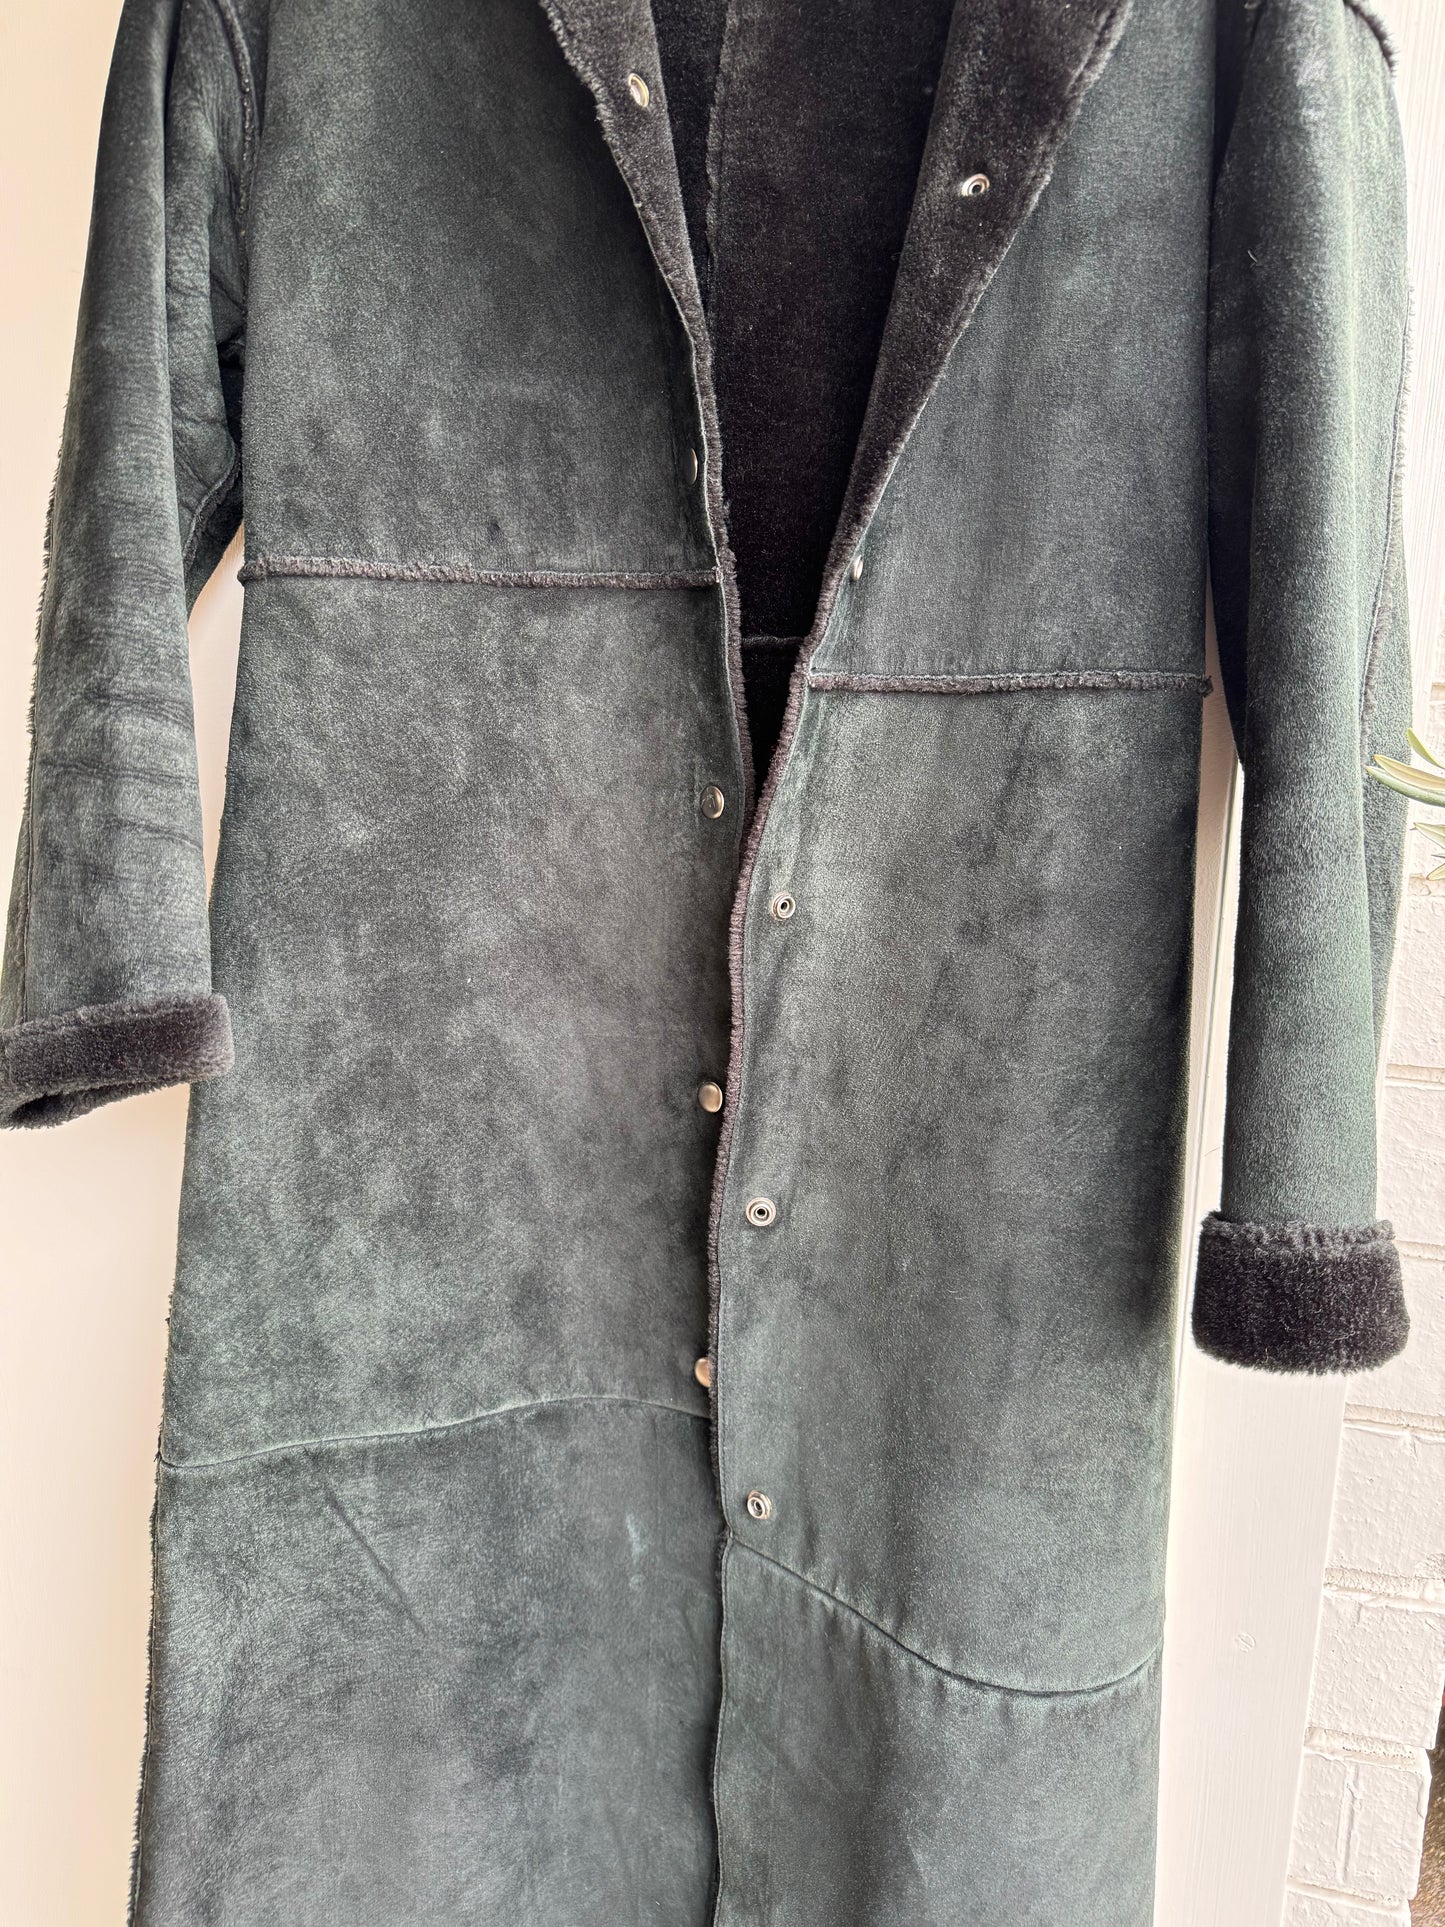 SUSTAIN VINTAGE LEATHER COAT FROM NYC